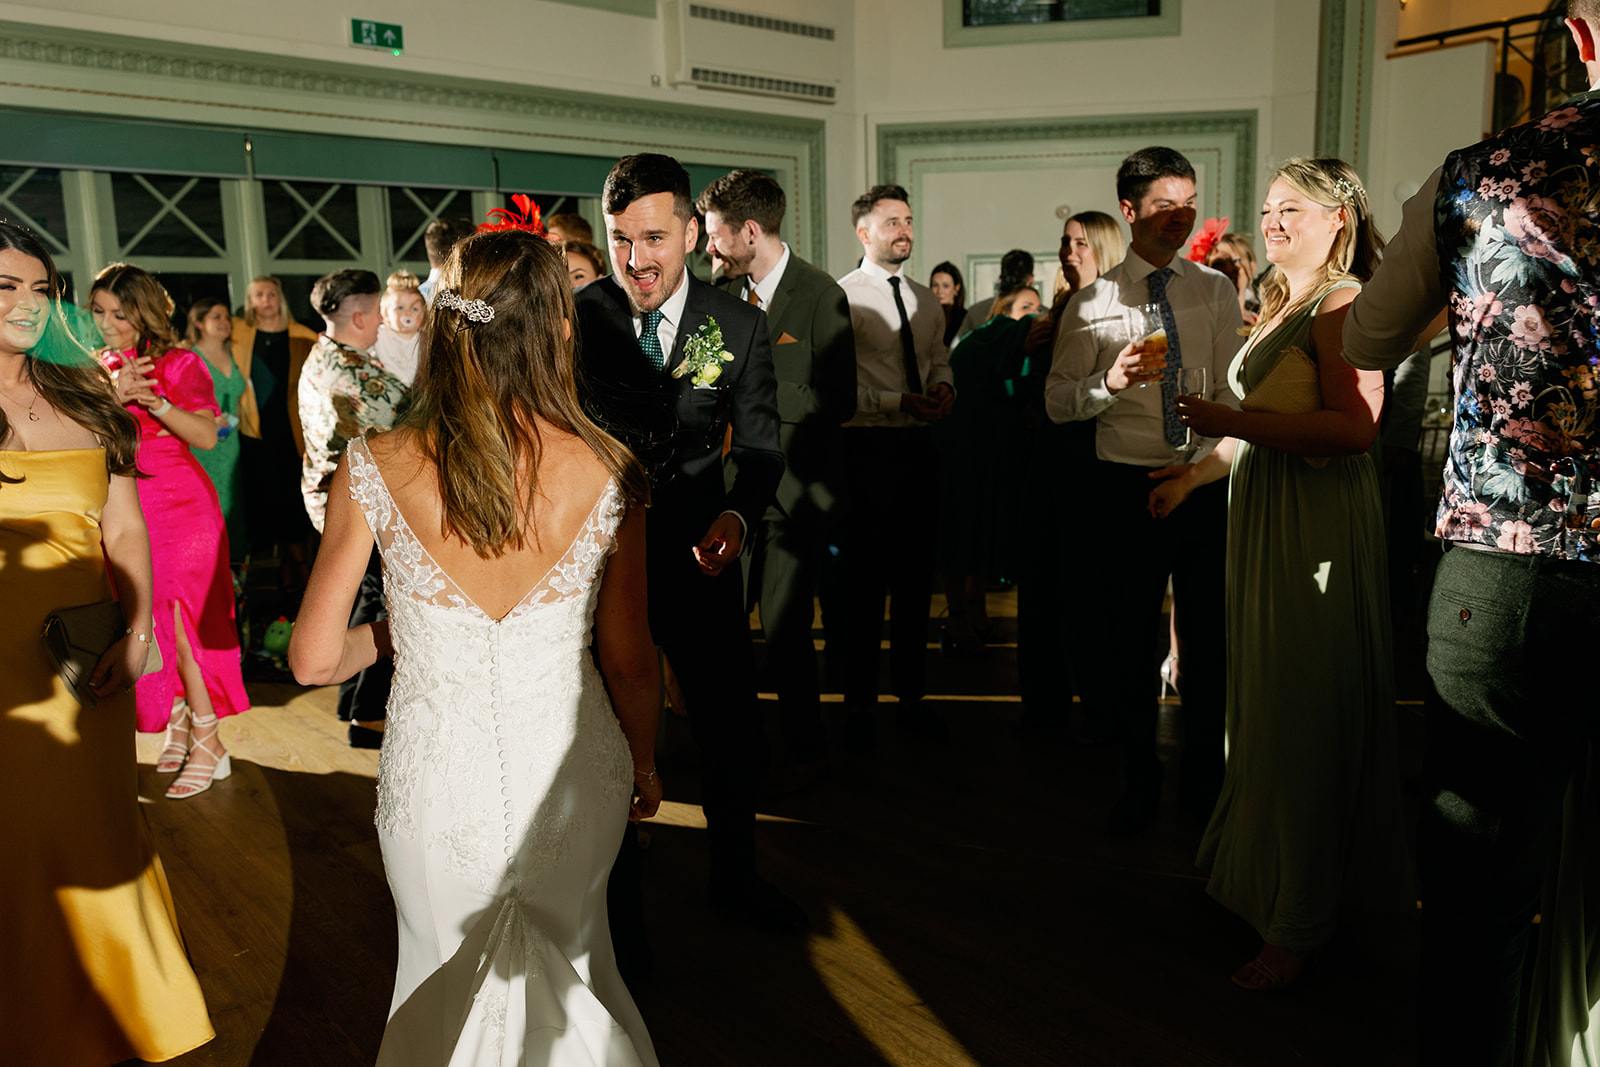 Dancing in the evening at a wedding in North Yorkshire 